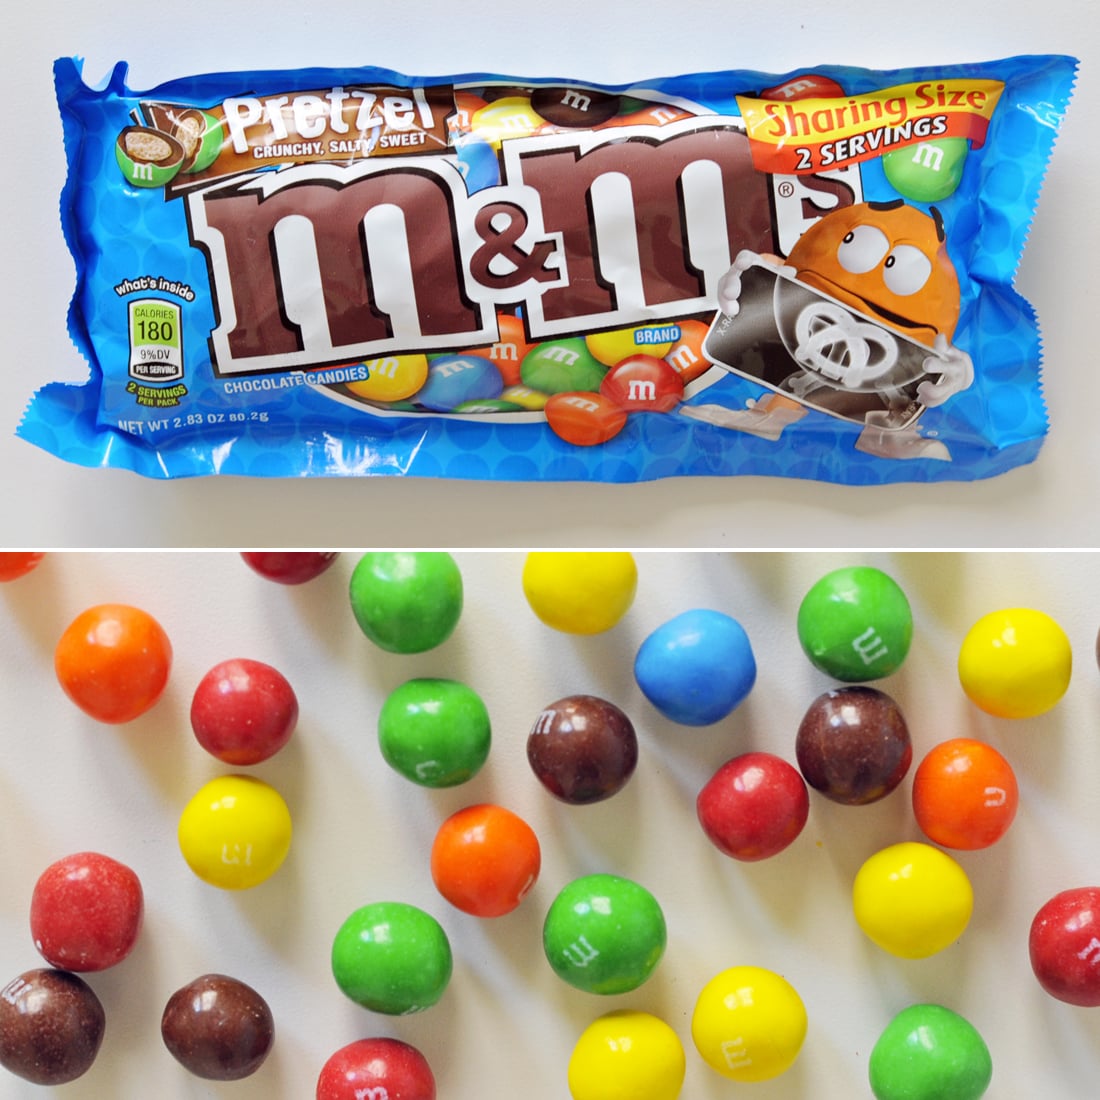 We Taste-Tested and Ranked the Best and Worst M&M's Flavors